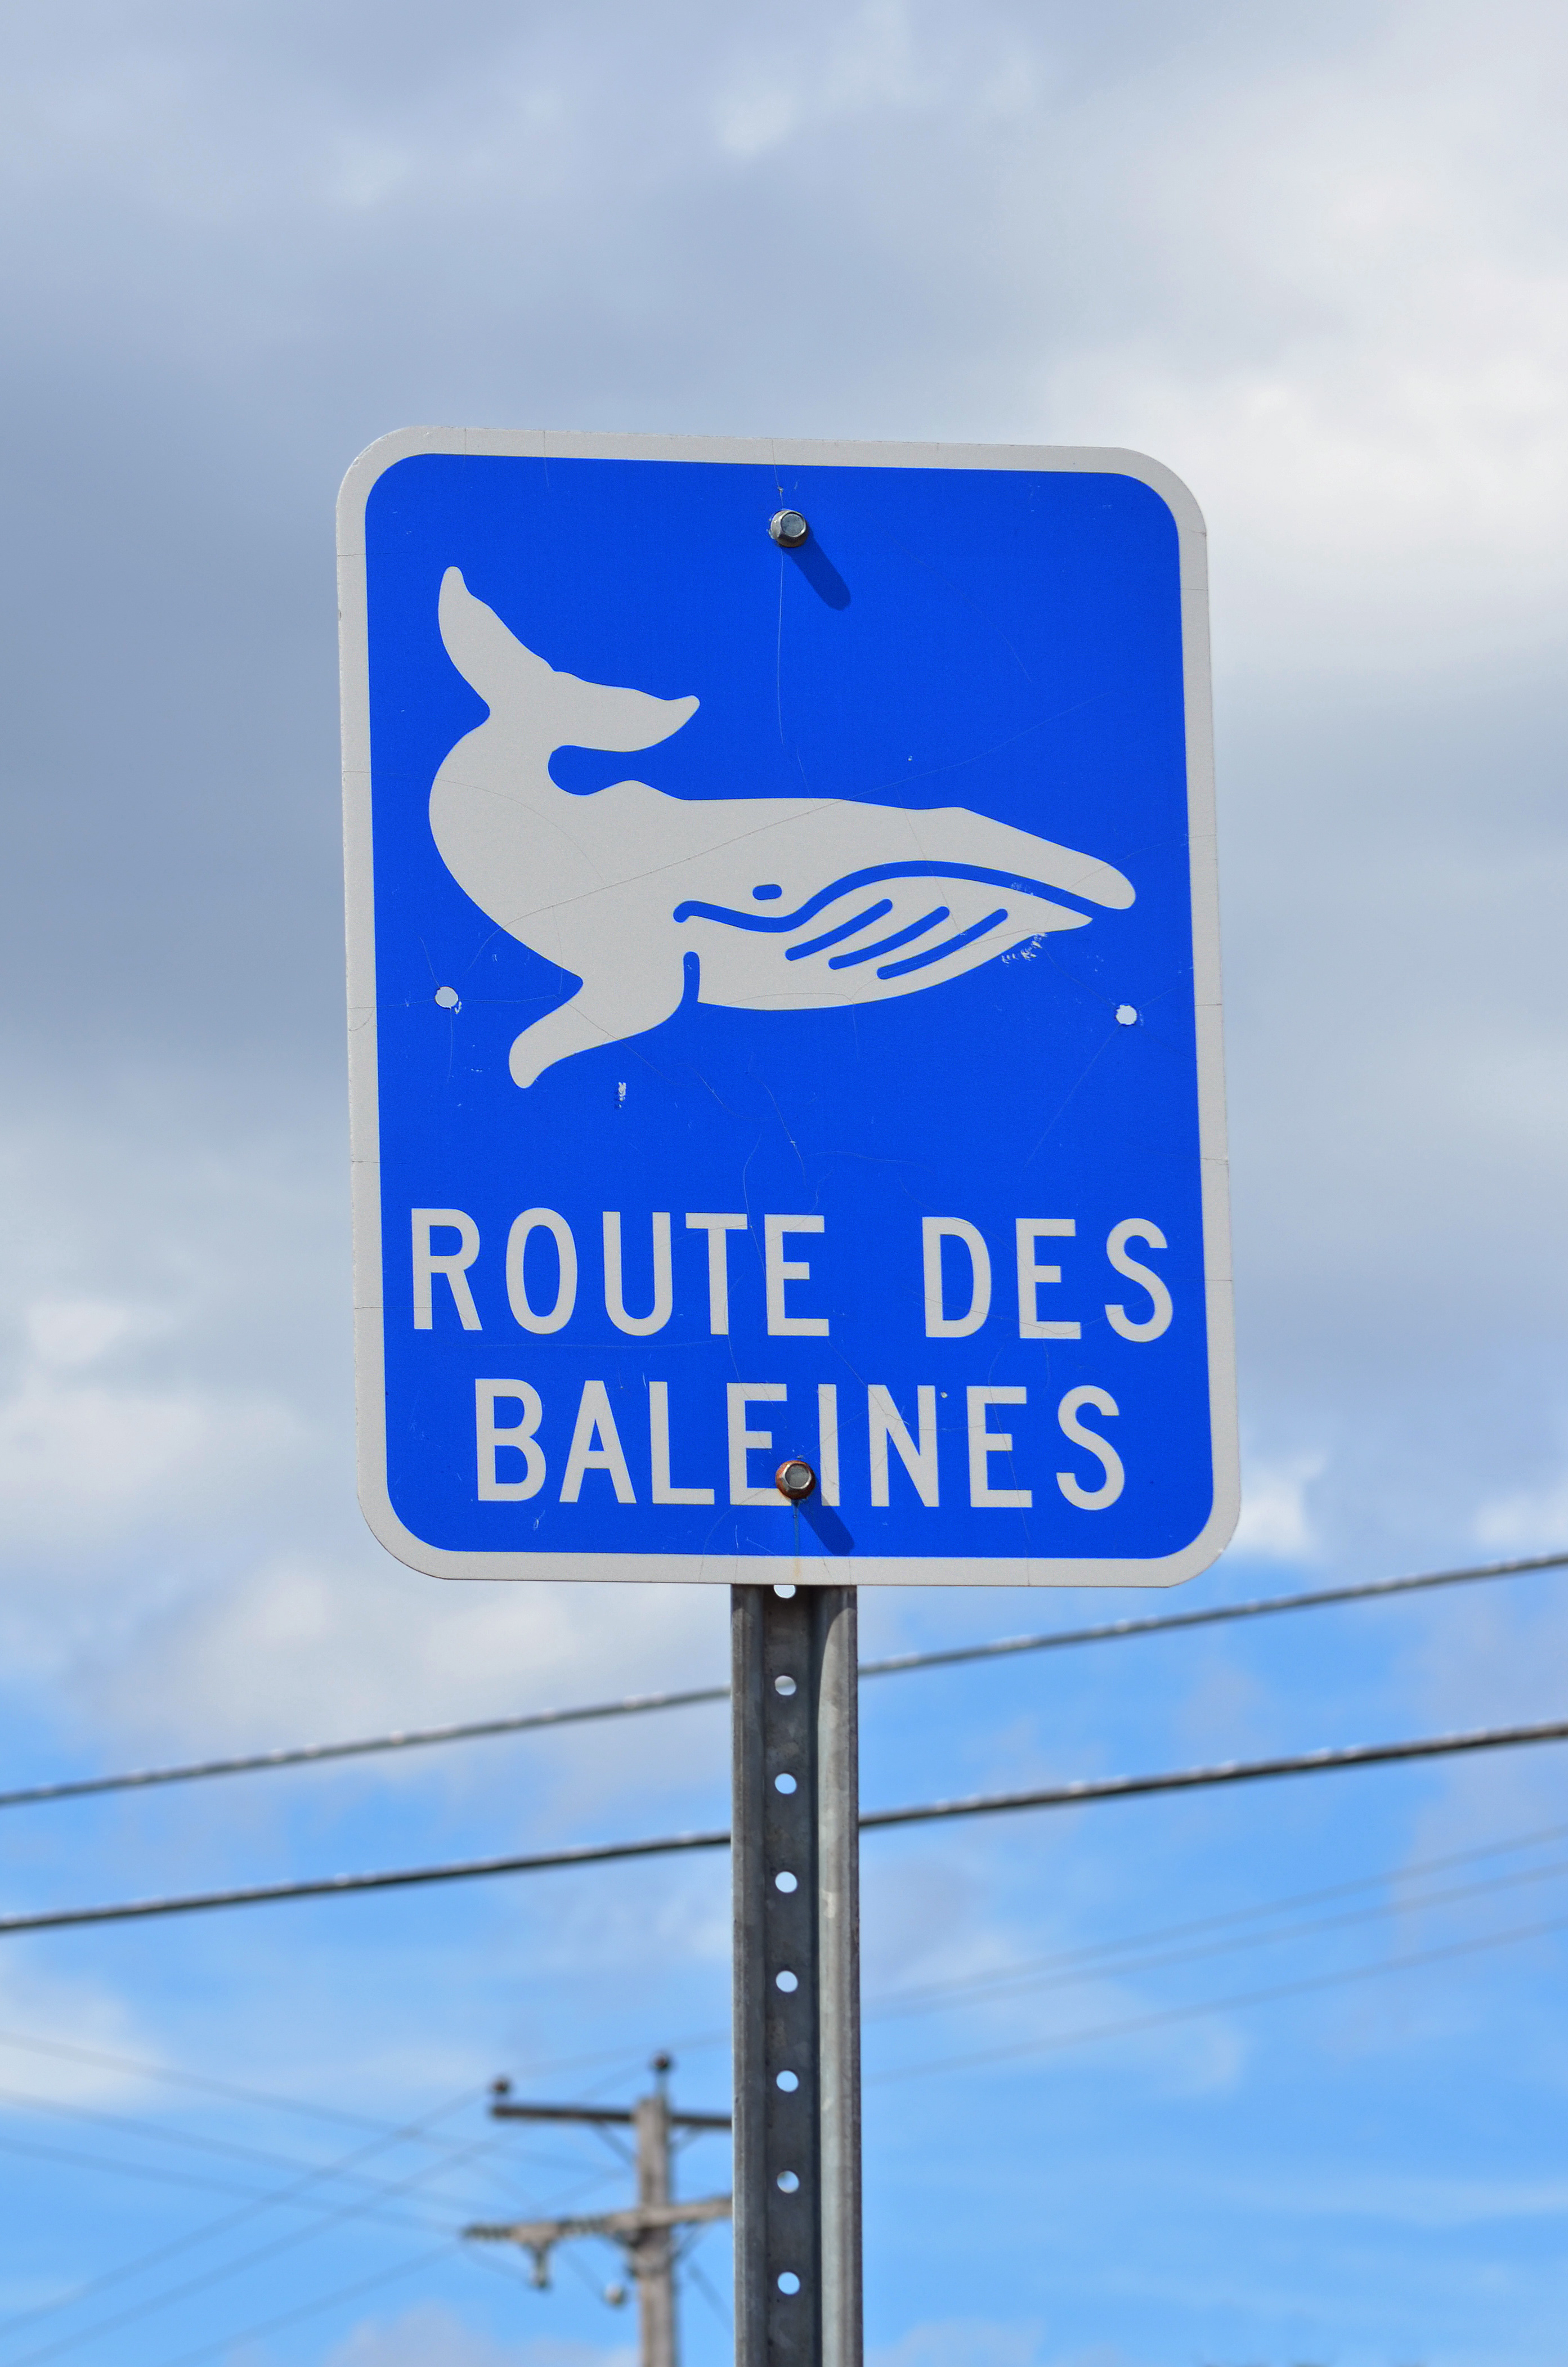 https://upload.wikimedia.org/wikipedia/commons/8/83/Tadoussac_-_Whale_road_sign.jpg